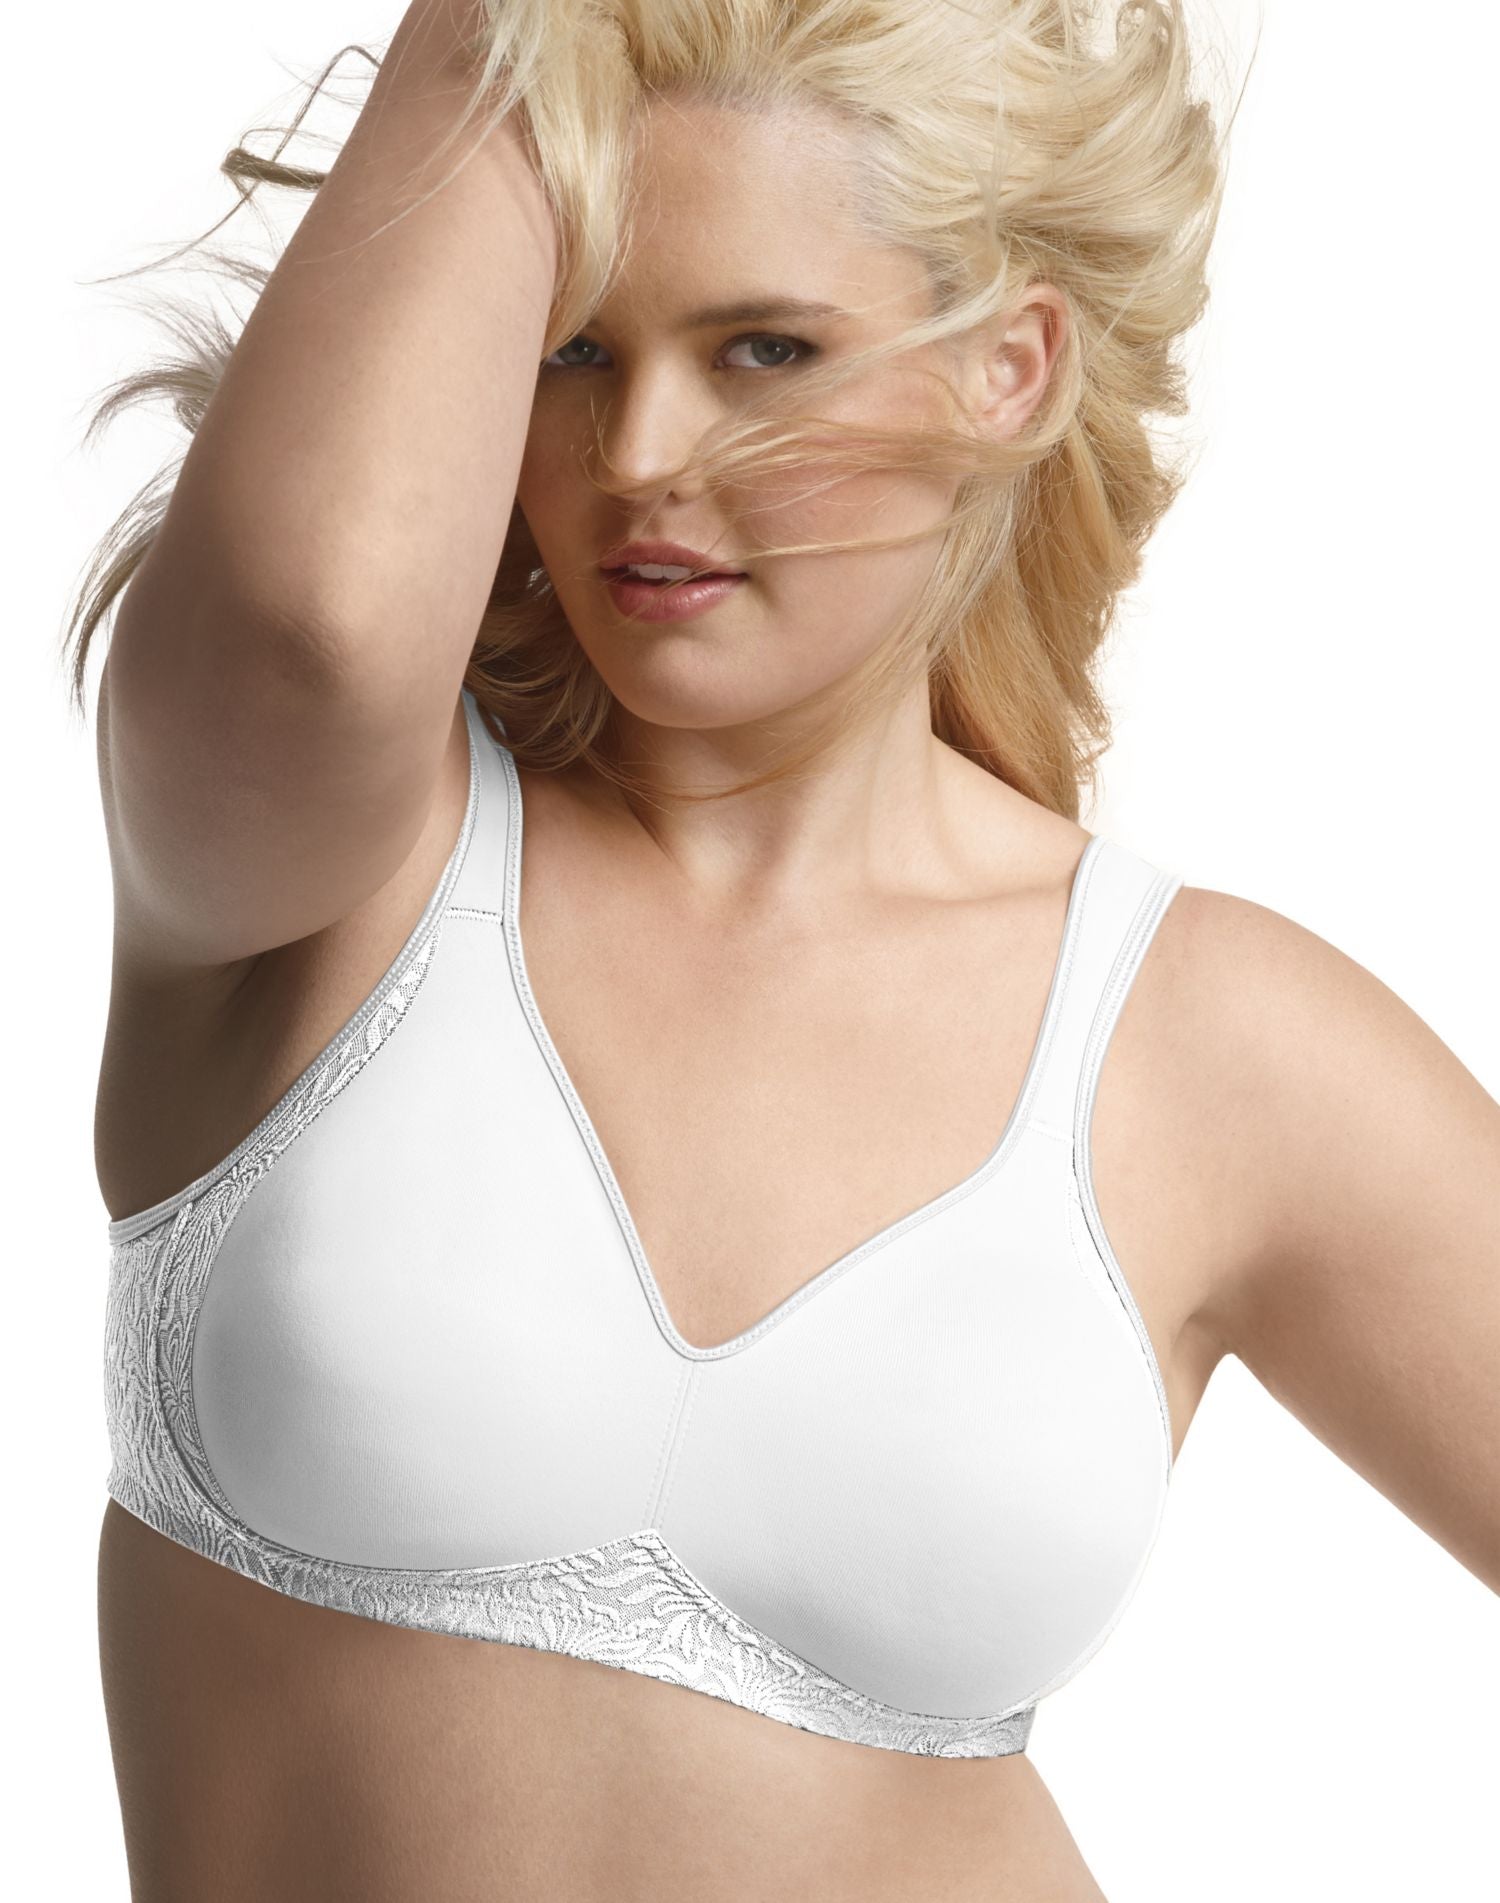 Playtex 18-Hour Seamless Smoothing Full Coverage Bra #4049 Size 40DD